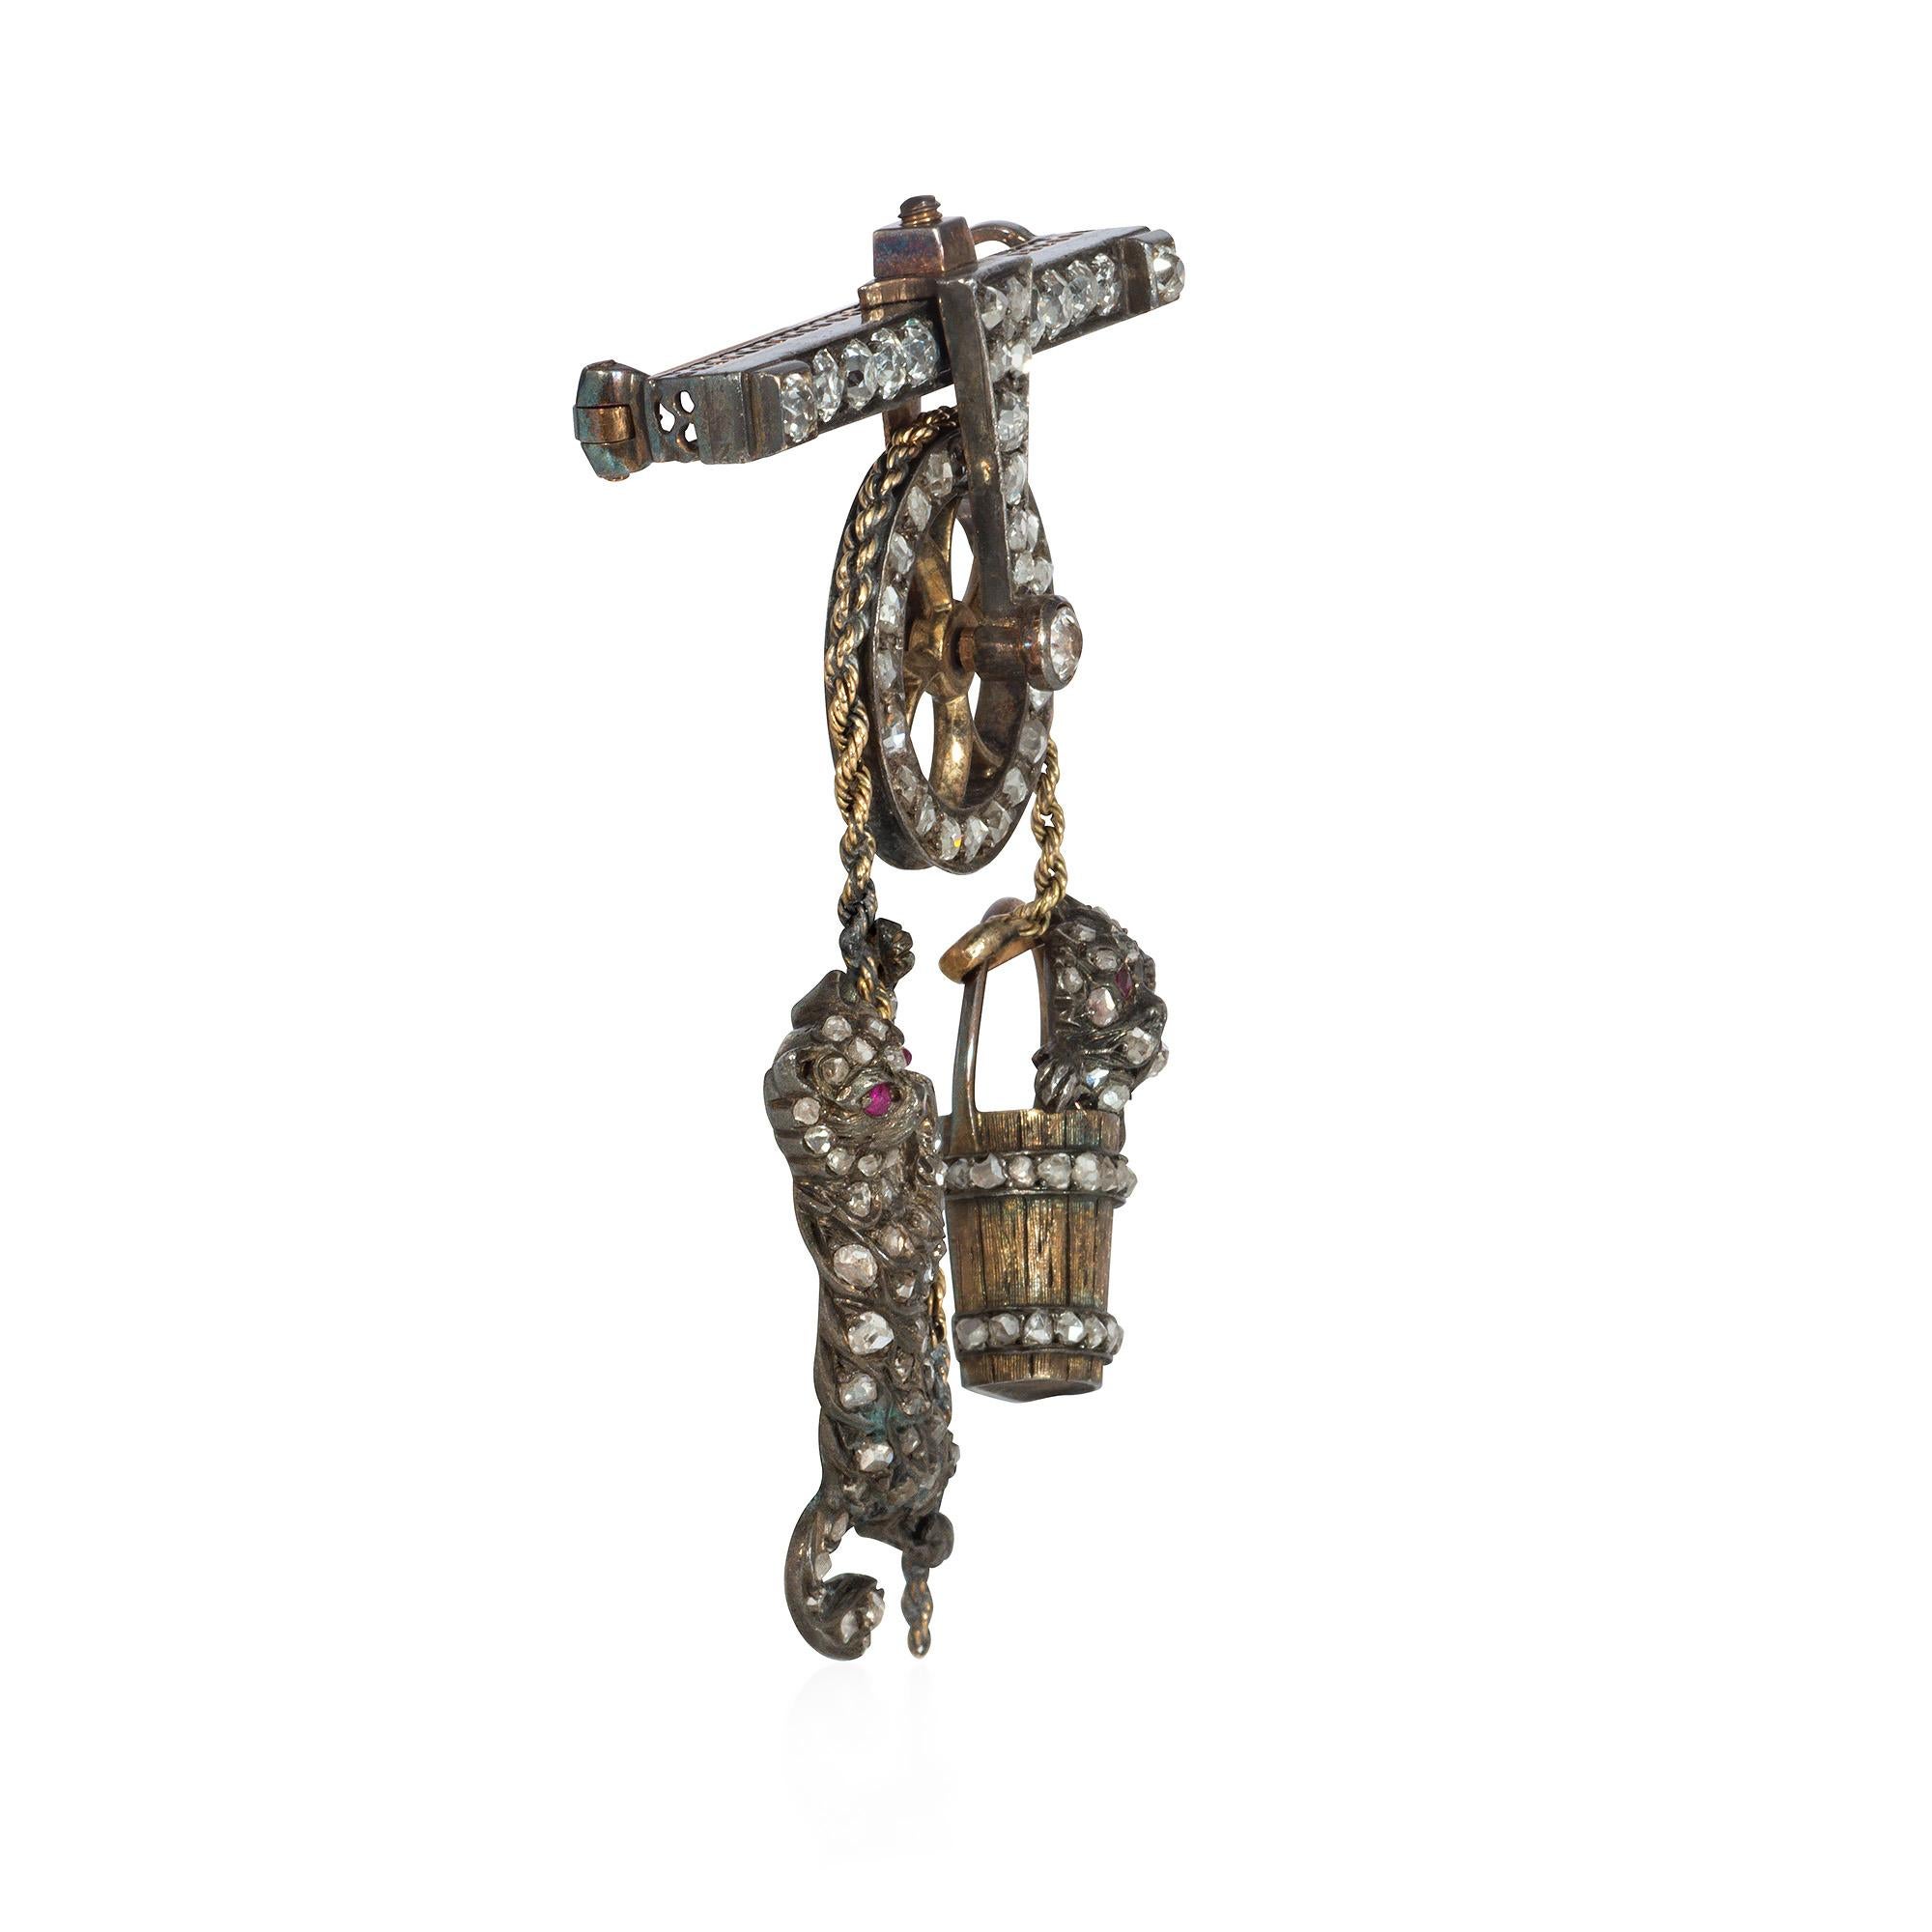 A Victorian diamond brooch in the form of an articulated mechanical pulley suspending a mischevious cat with ruby eyes toying with a dog in a bucket, in sterling silver and 15k gold. England